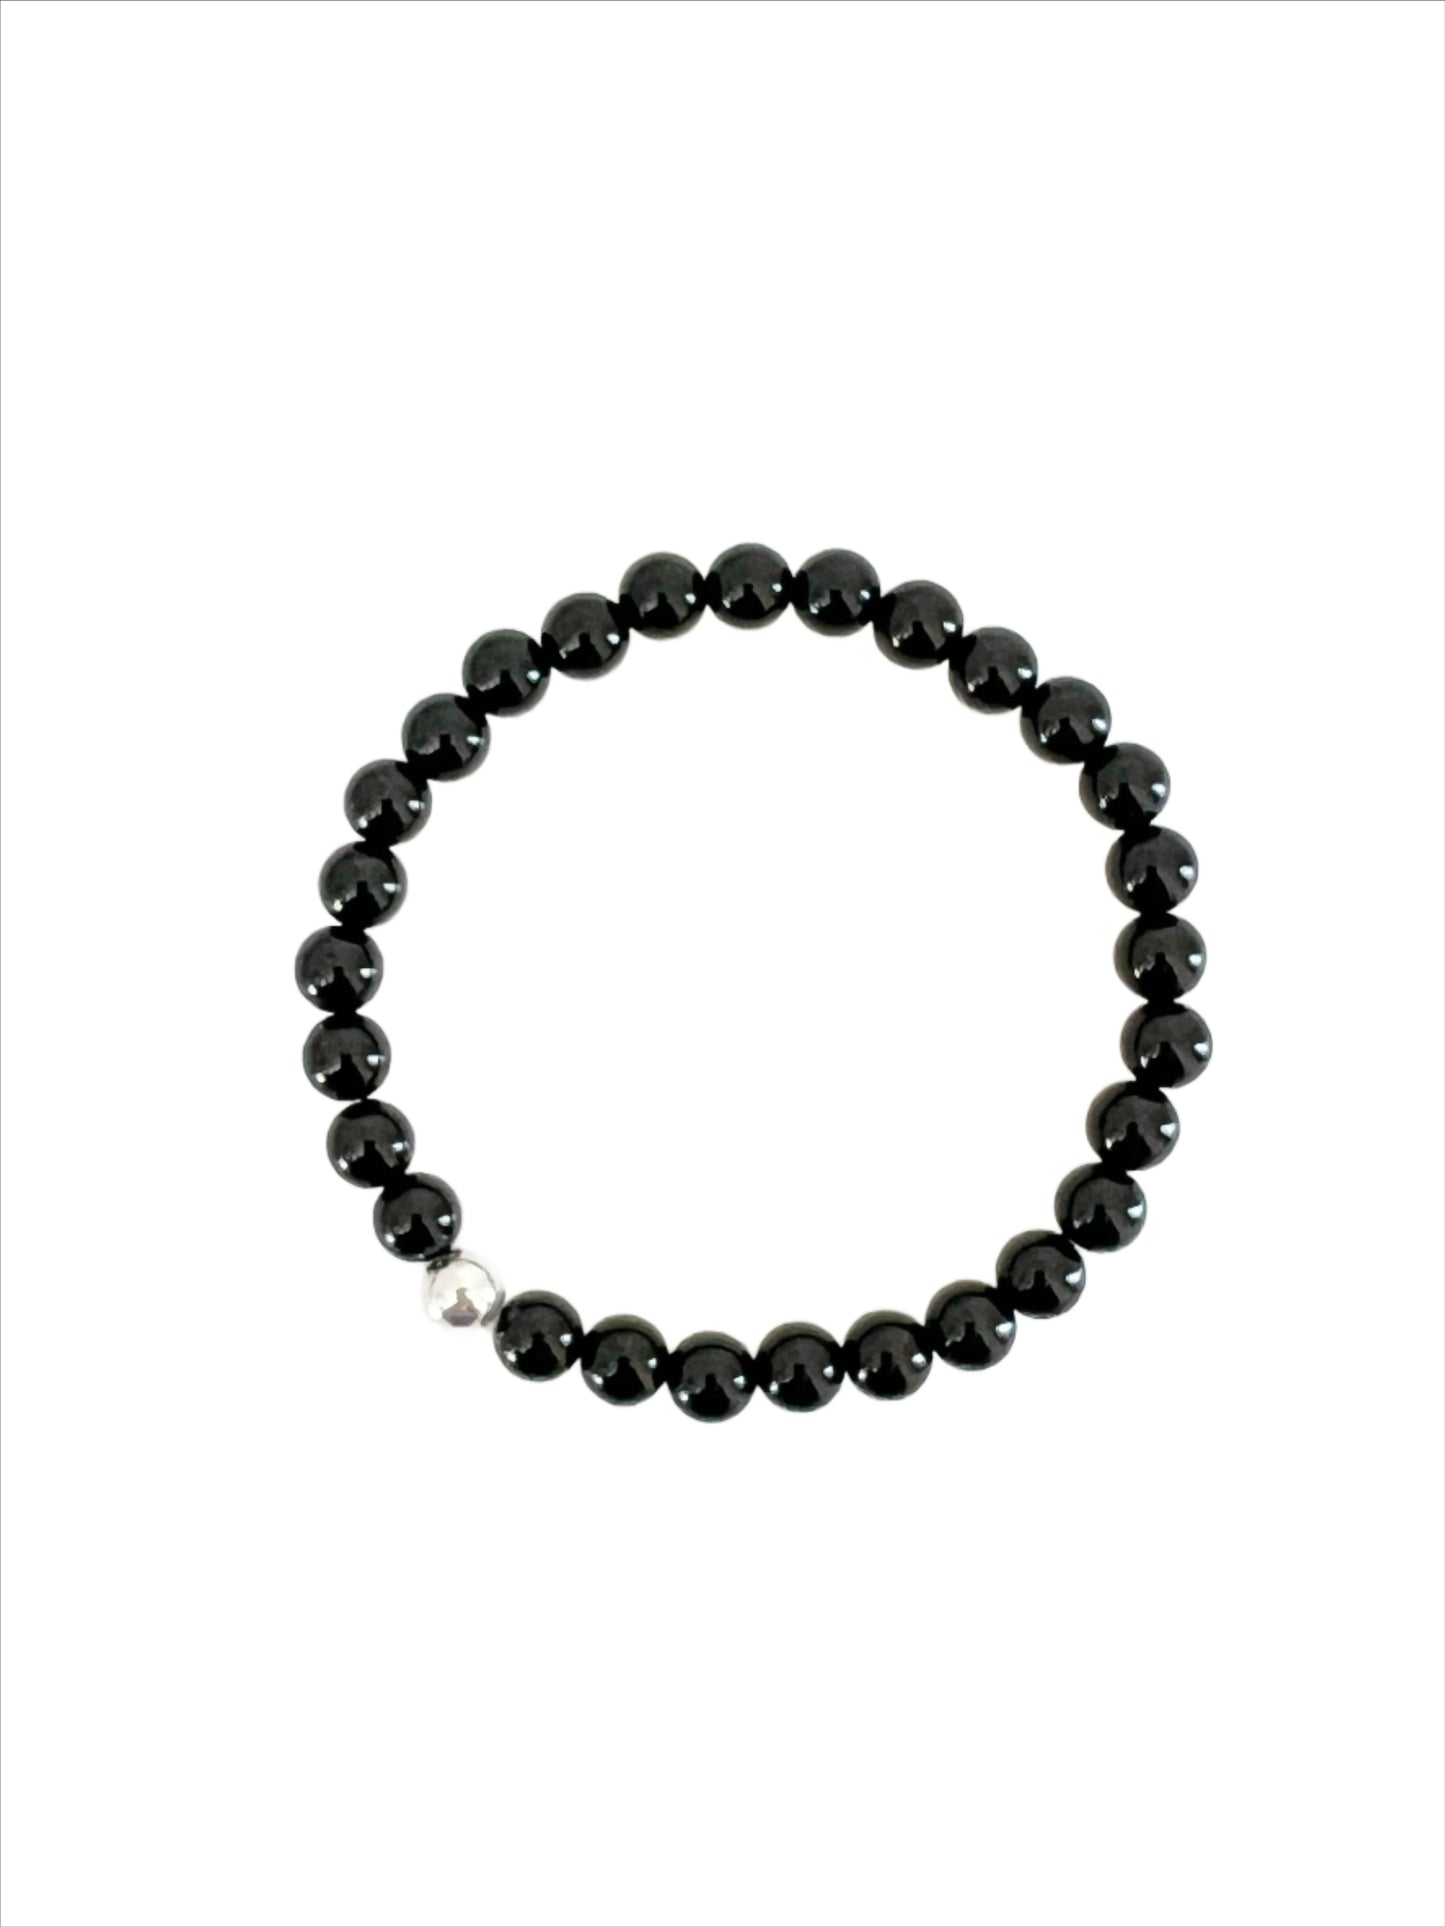 black onyx round beaded stretch bracelet with one sterling silver round bead